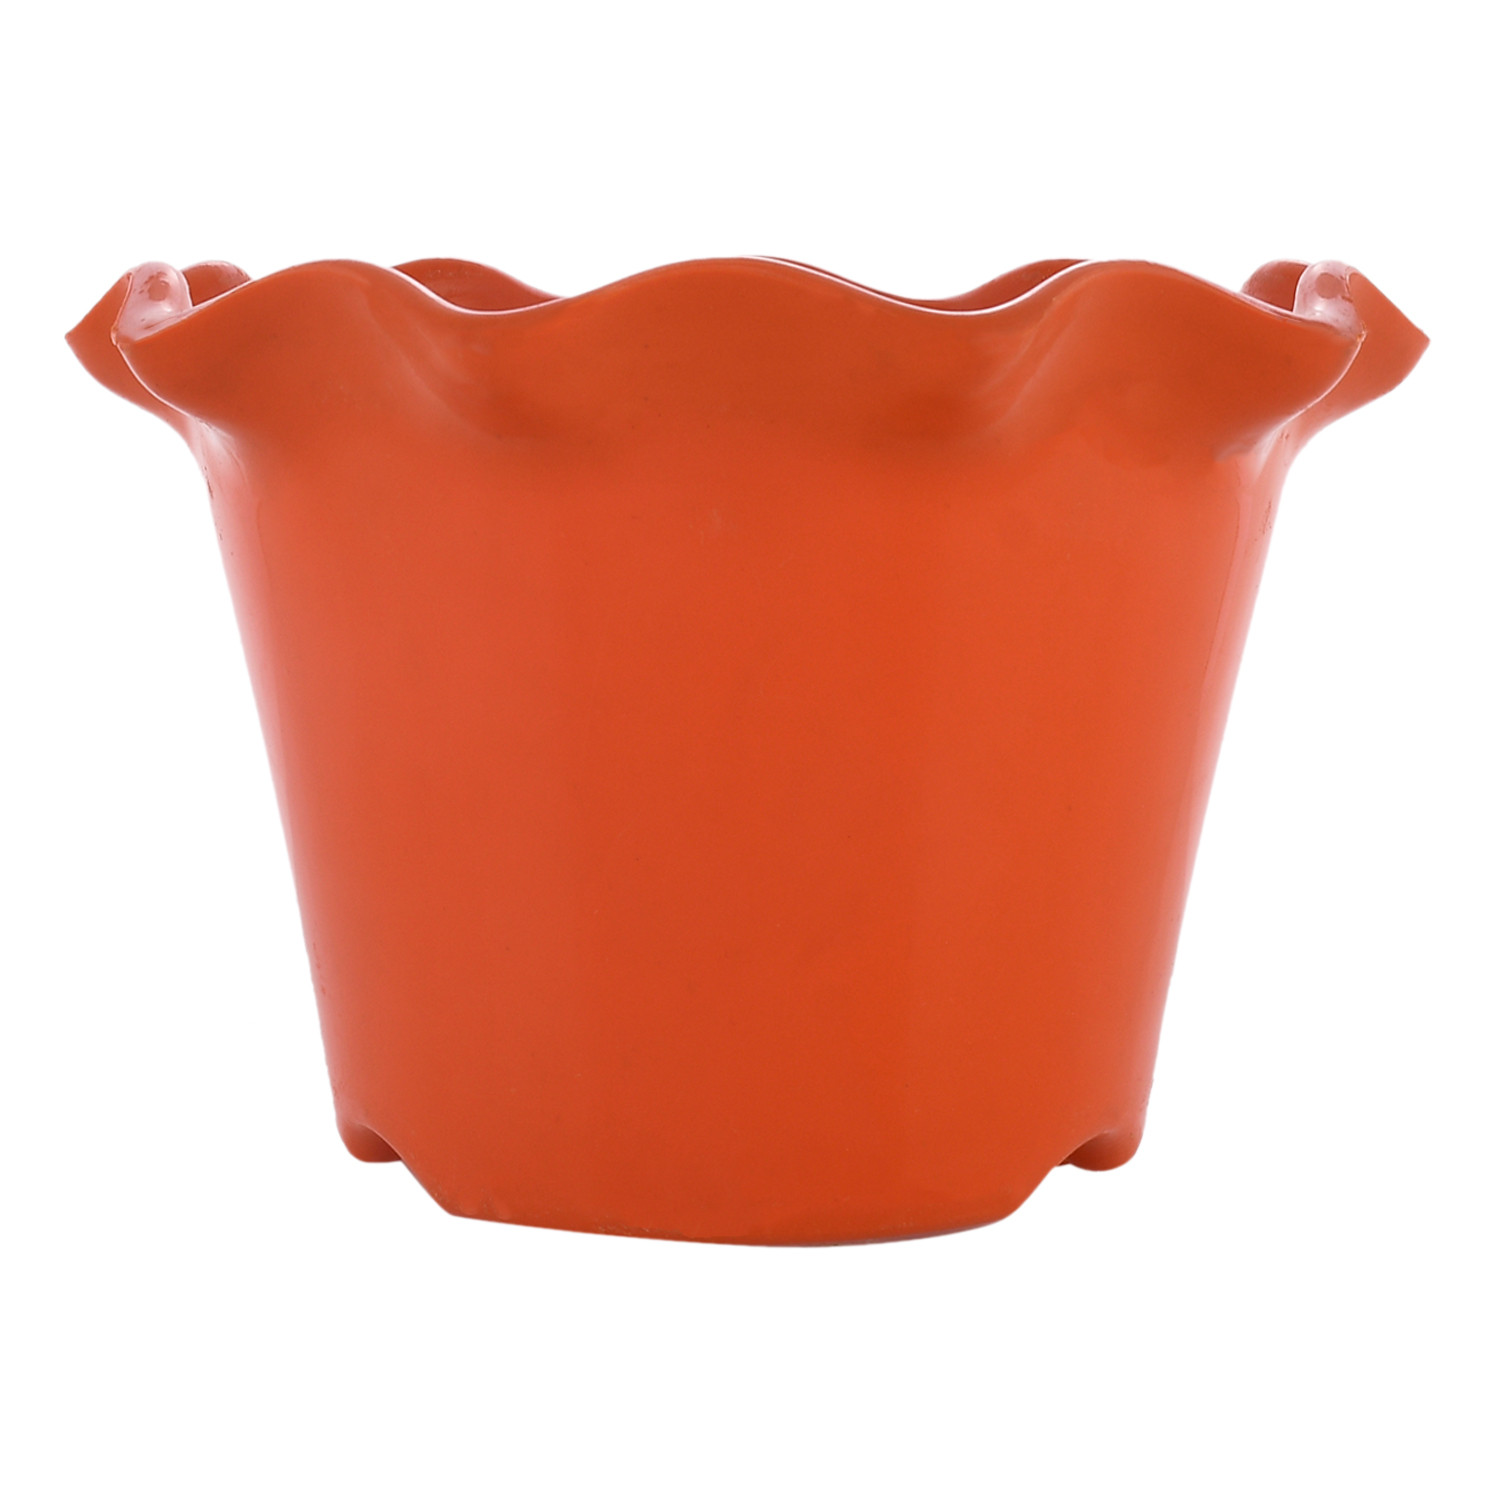 Kuber Industries Blossom Flower Pot|Durable Plastic Flower Pot|Gamla With Drain Holes for Home Décor|Balcony|Garden|8 Inch|Pack of 3 (Multicolor)